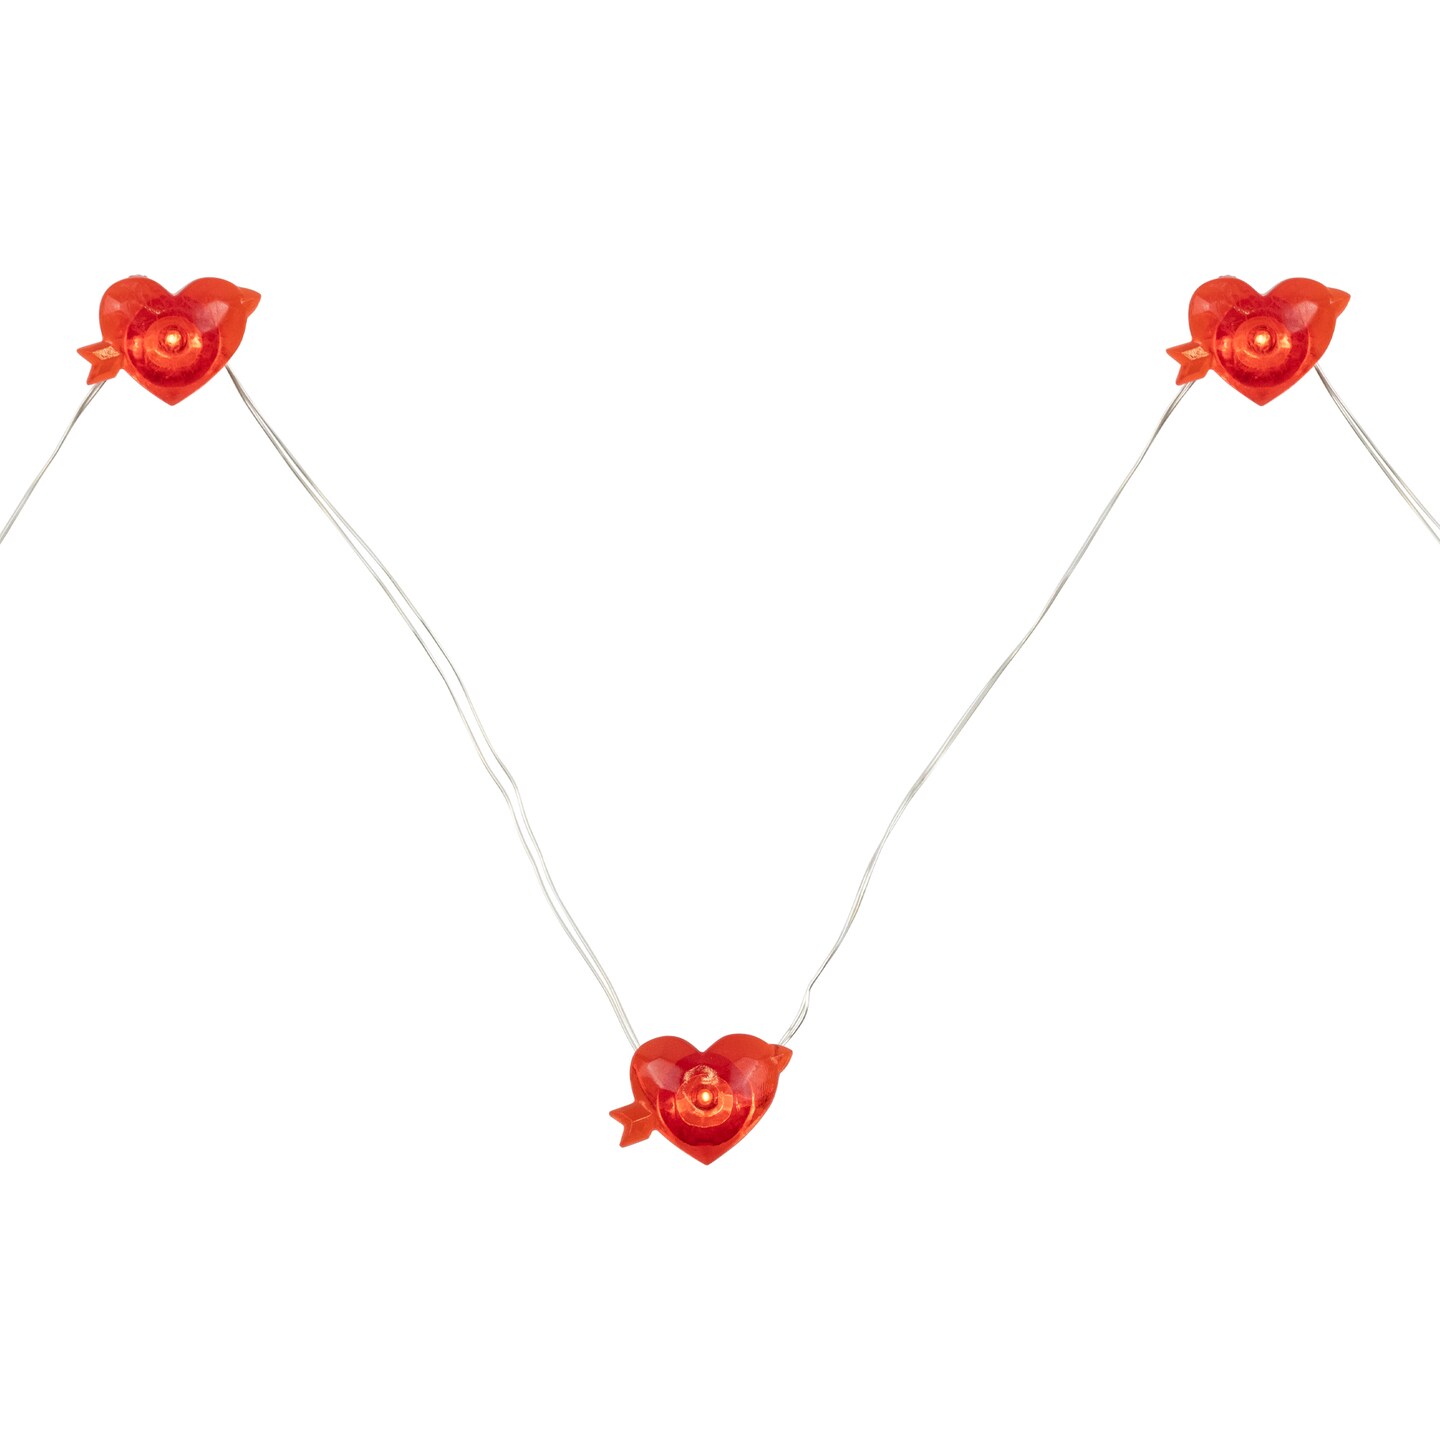 Northlight 20-Count Valentine&#x27;s Day Heart and Arrow LED Fairy Lights, 6.25ft, Copper Wire